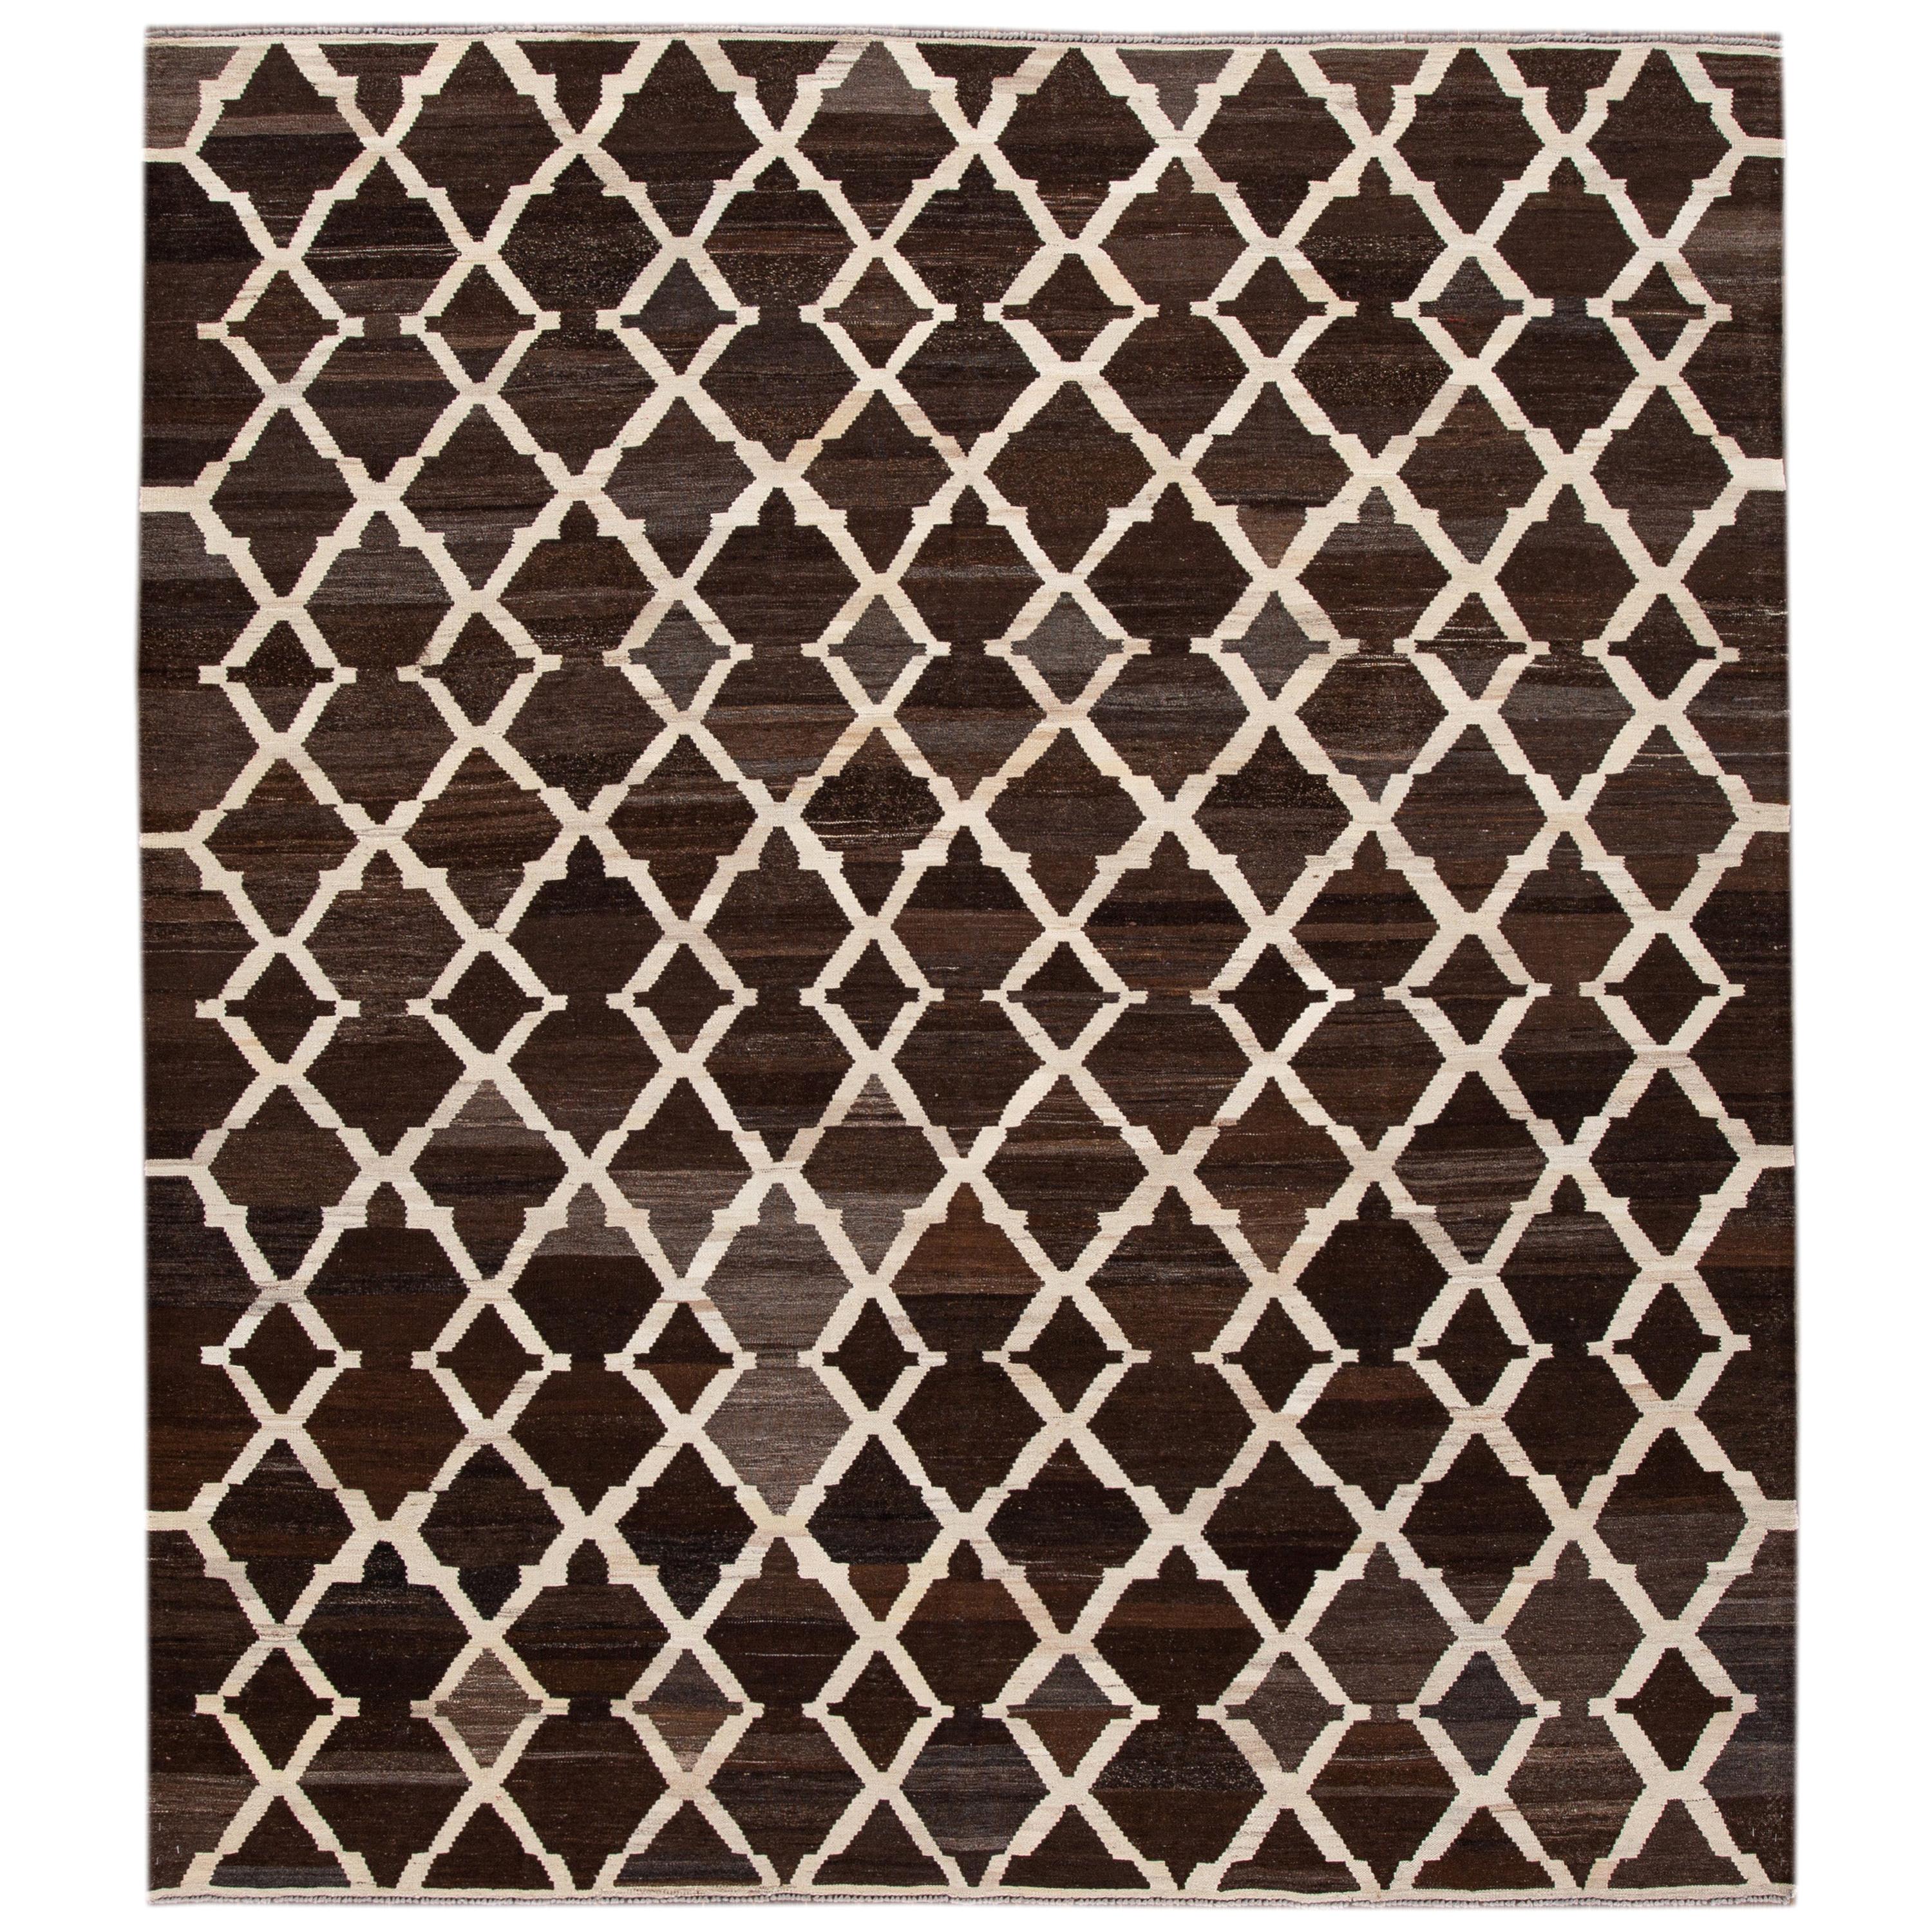 Contemporary Brown Flaweave Kilim Wool Rug With Trellis Design For Sale